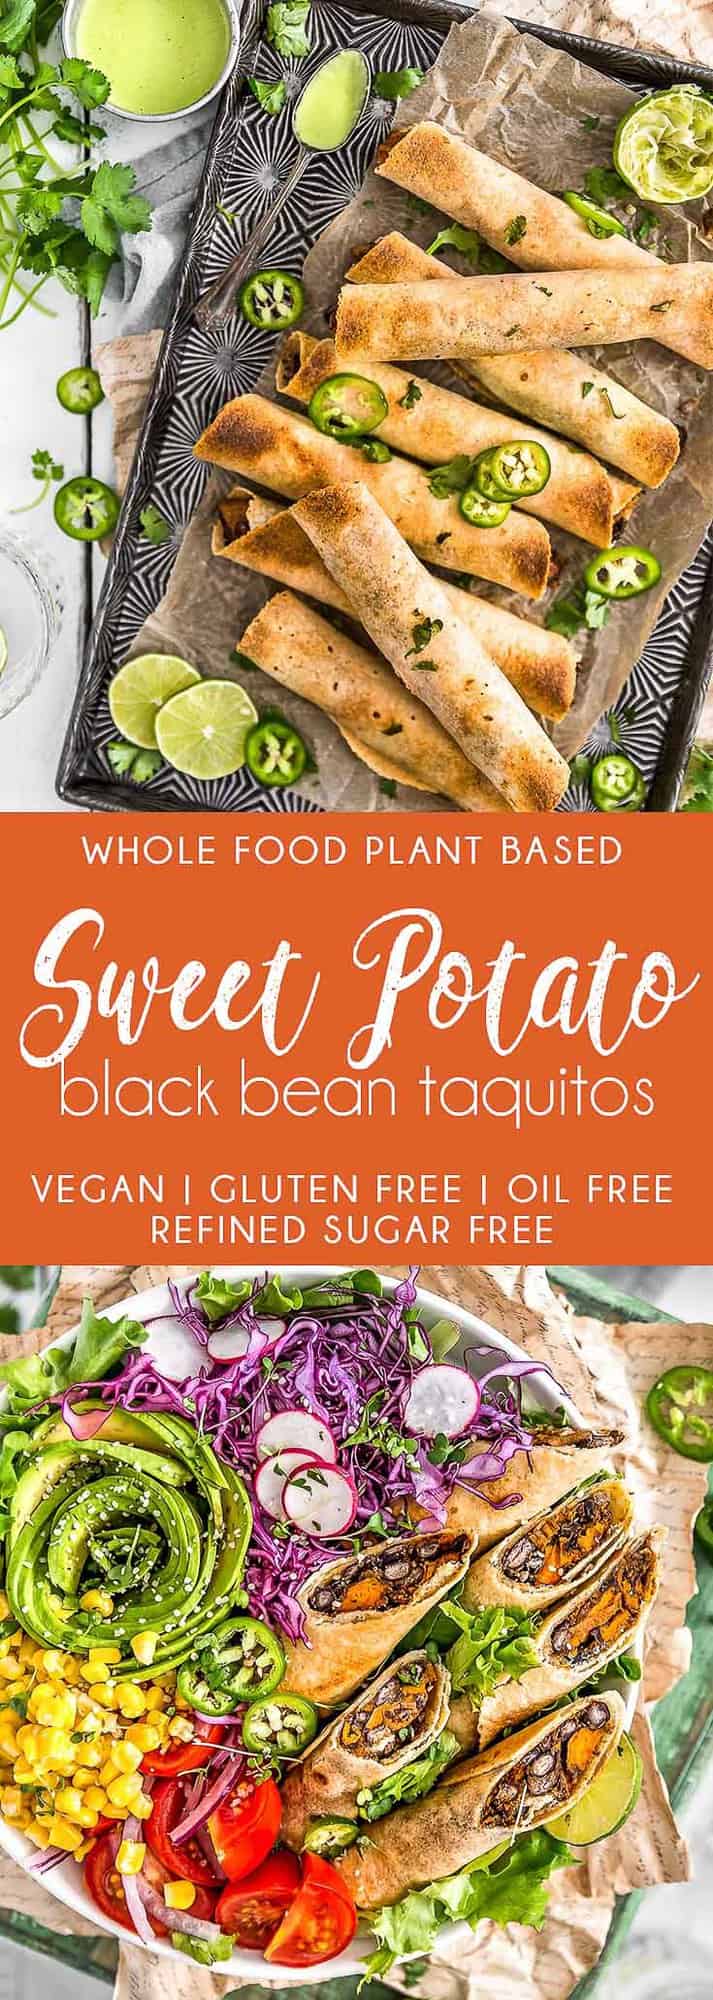 Sweet Potato Black Bean Taquitos, vegan taquitos, baked taquitos, sweet potato, black beans, taquitos, plant based, vegan, vegetarian, whole food plant based, gluten free, recipe, wfpb, healthy, healthy vegan, oil free, no refined sugar, no oil, refined sugar free, dairy free, dinner party, entertaining, dinner, lunch, no oil taquito, easy recipe, appetizer, summer, fall, winter, spring